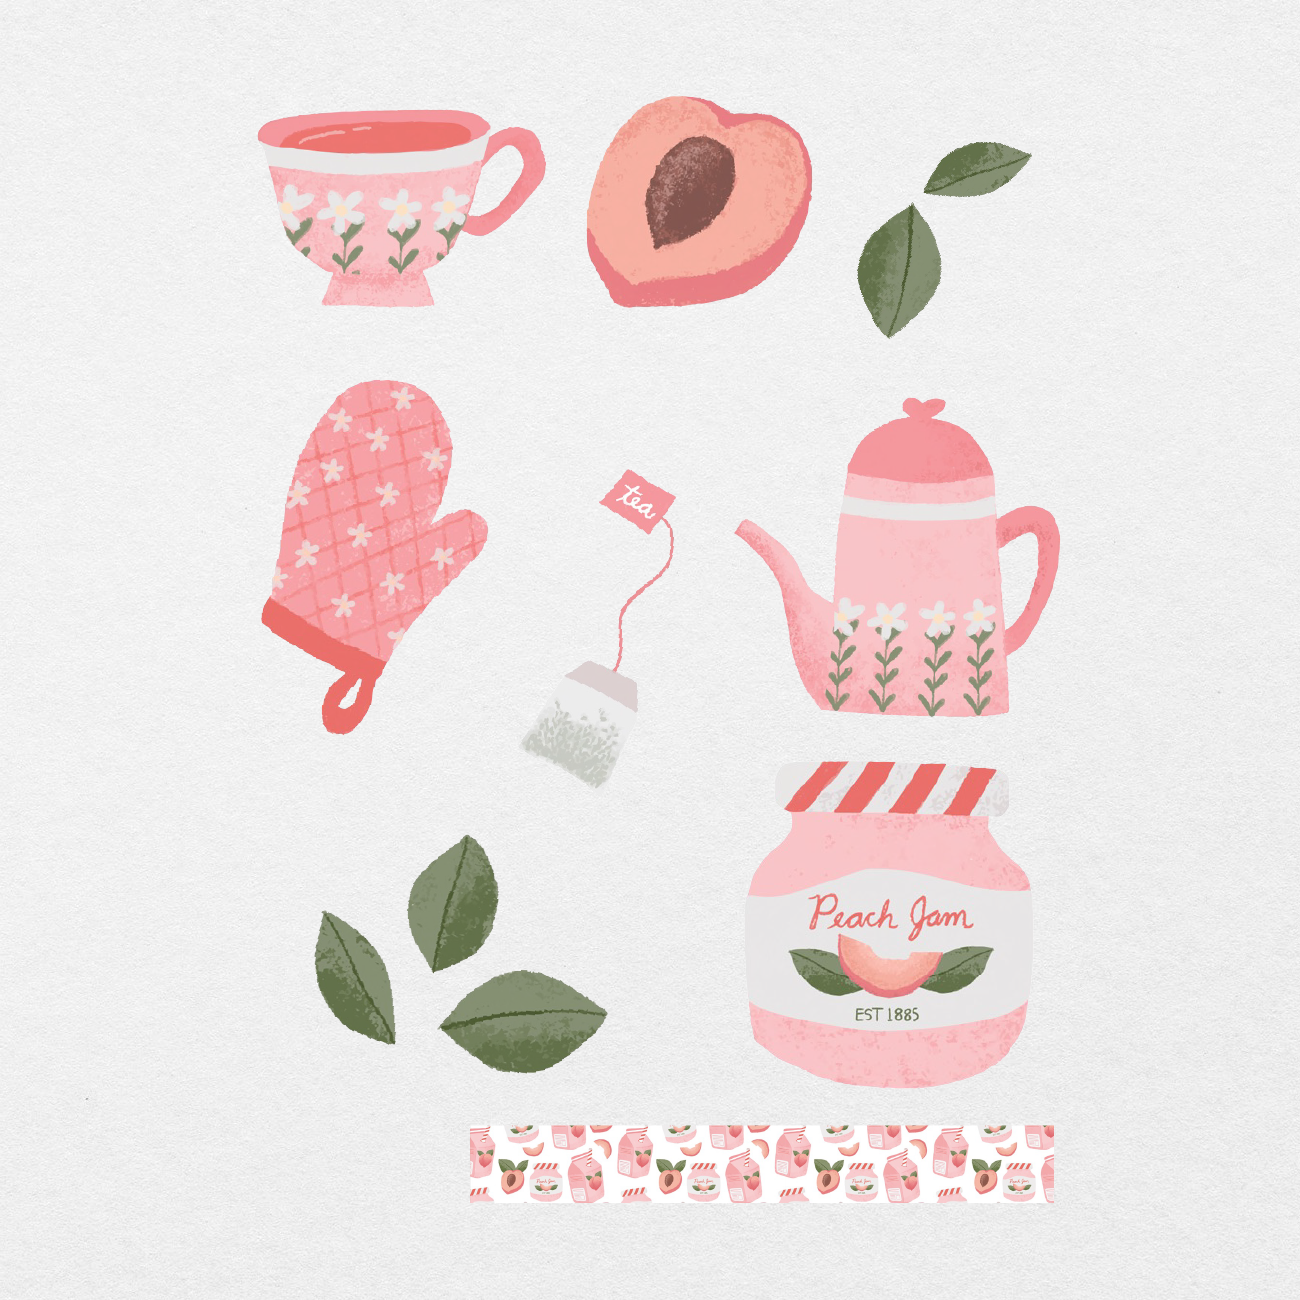 Cute stickers and stationery by pocketpeachesco on